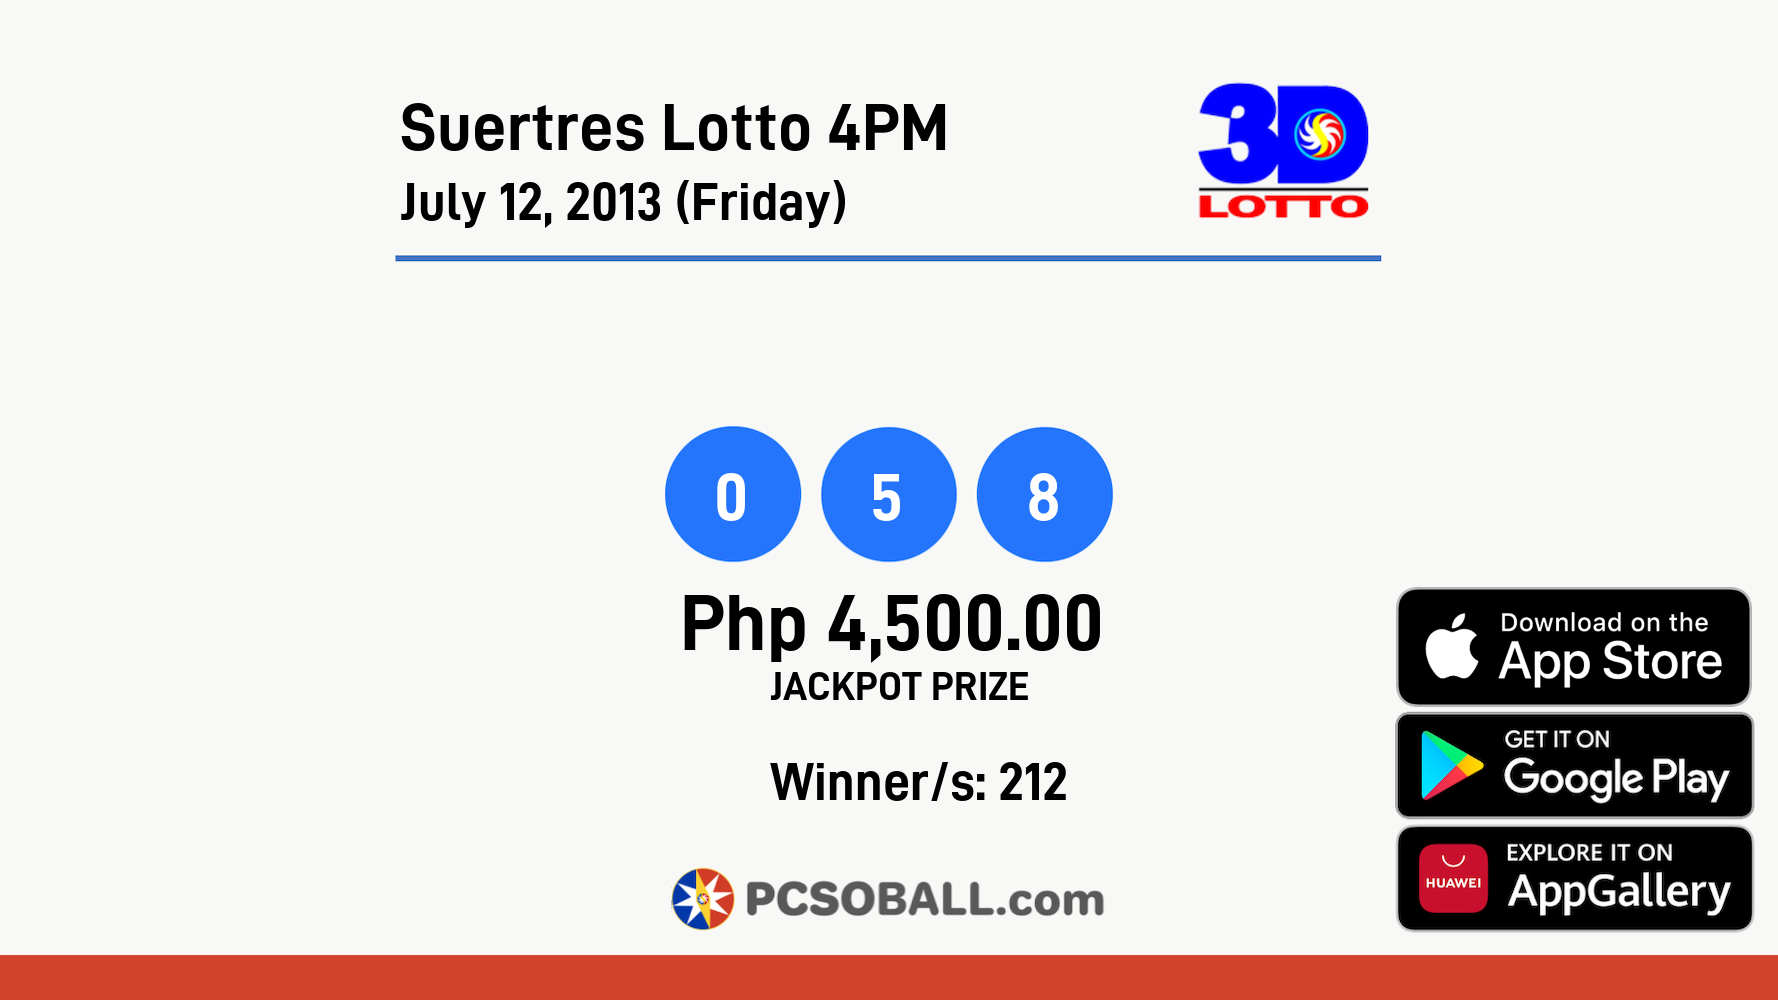 Suertres Lotto 4PM July 12, 2013 (Friday) Result